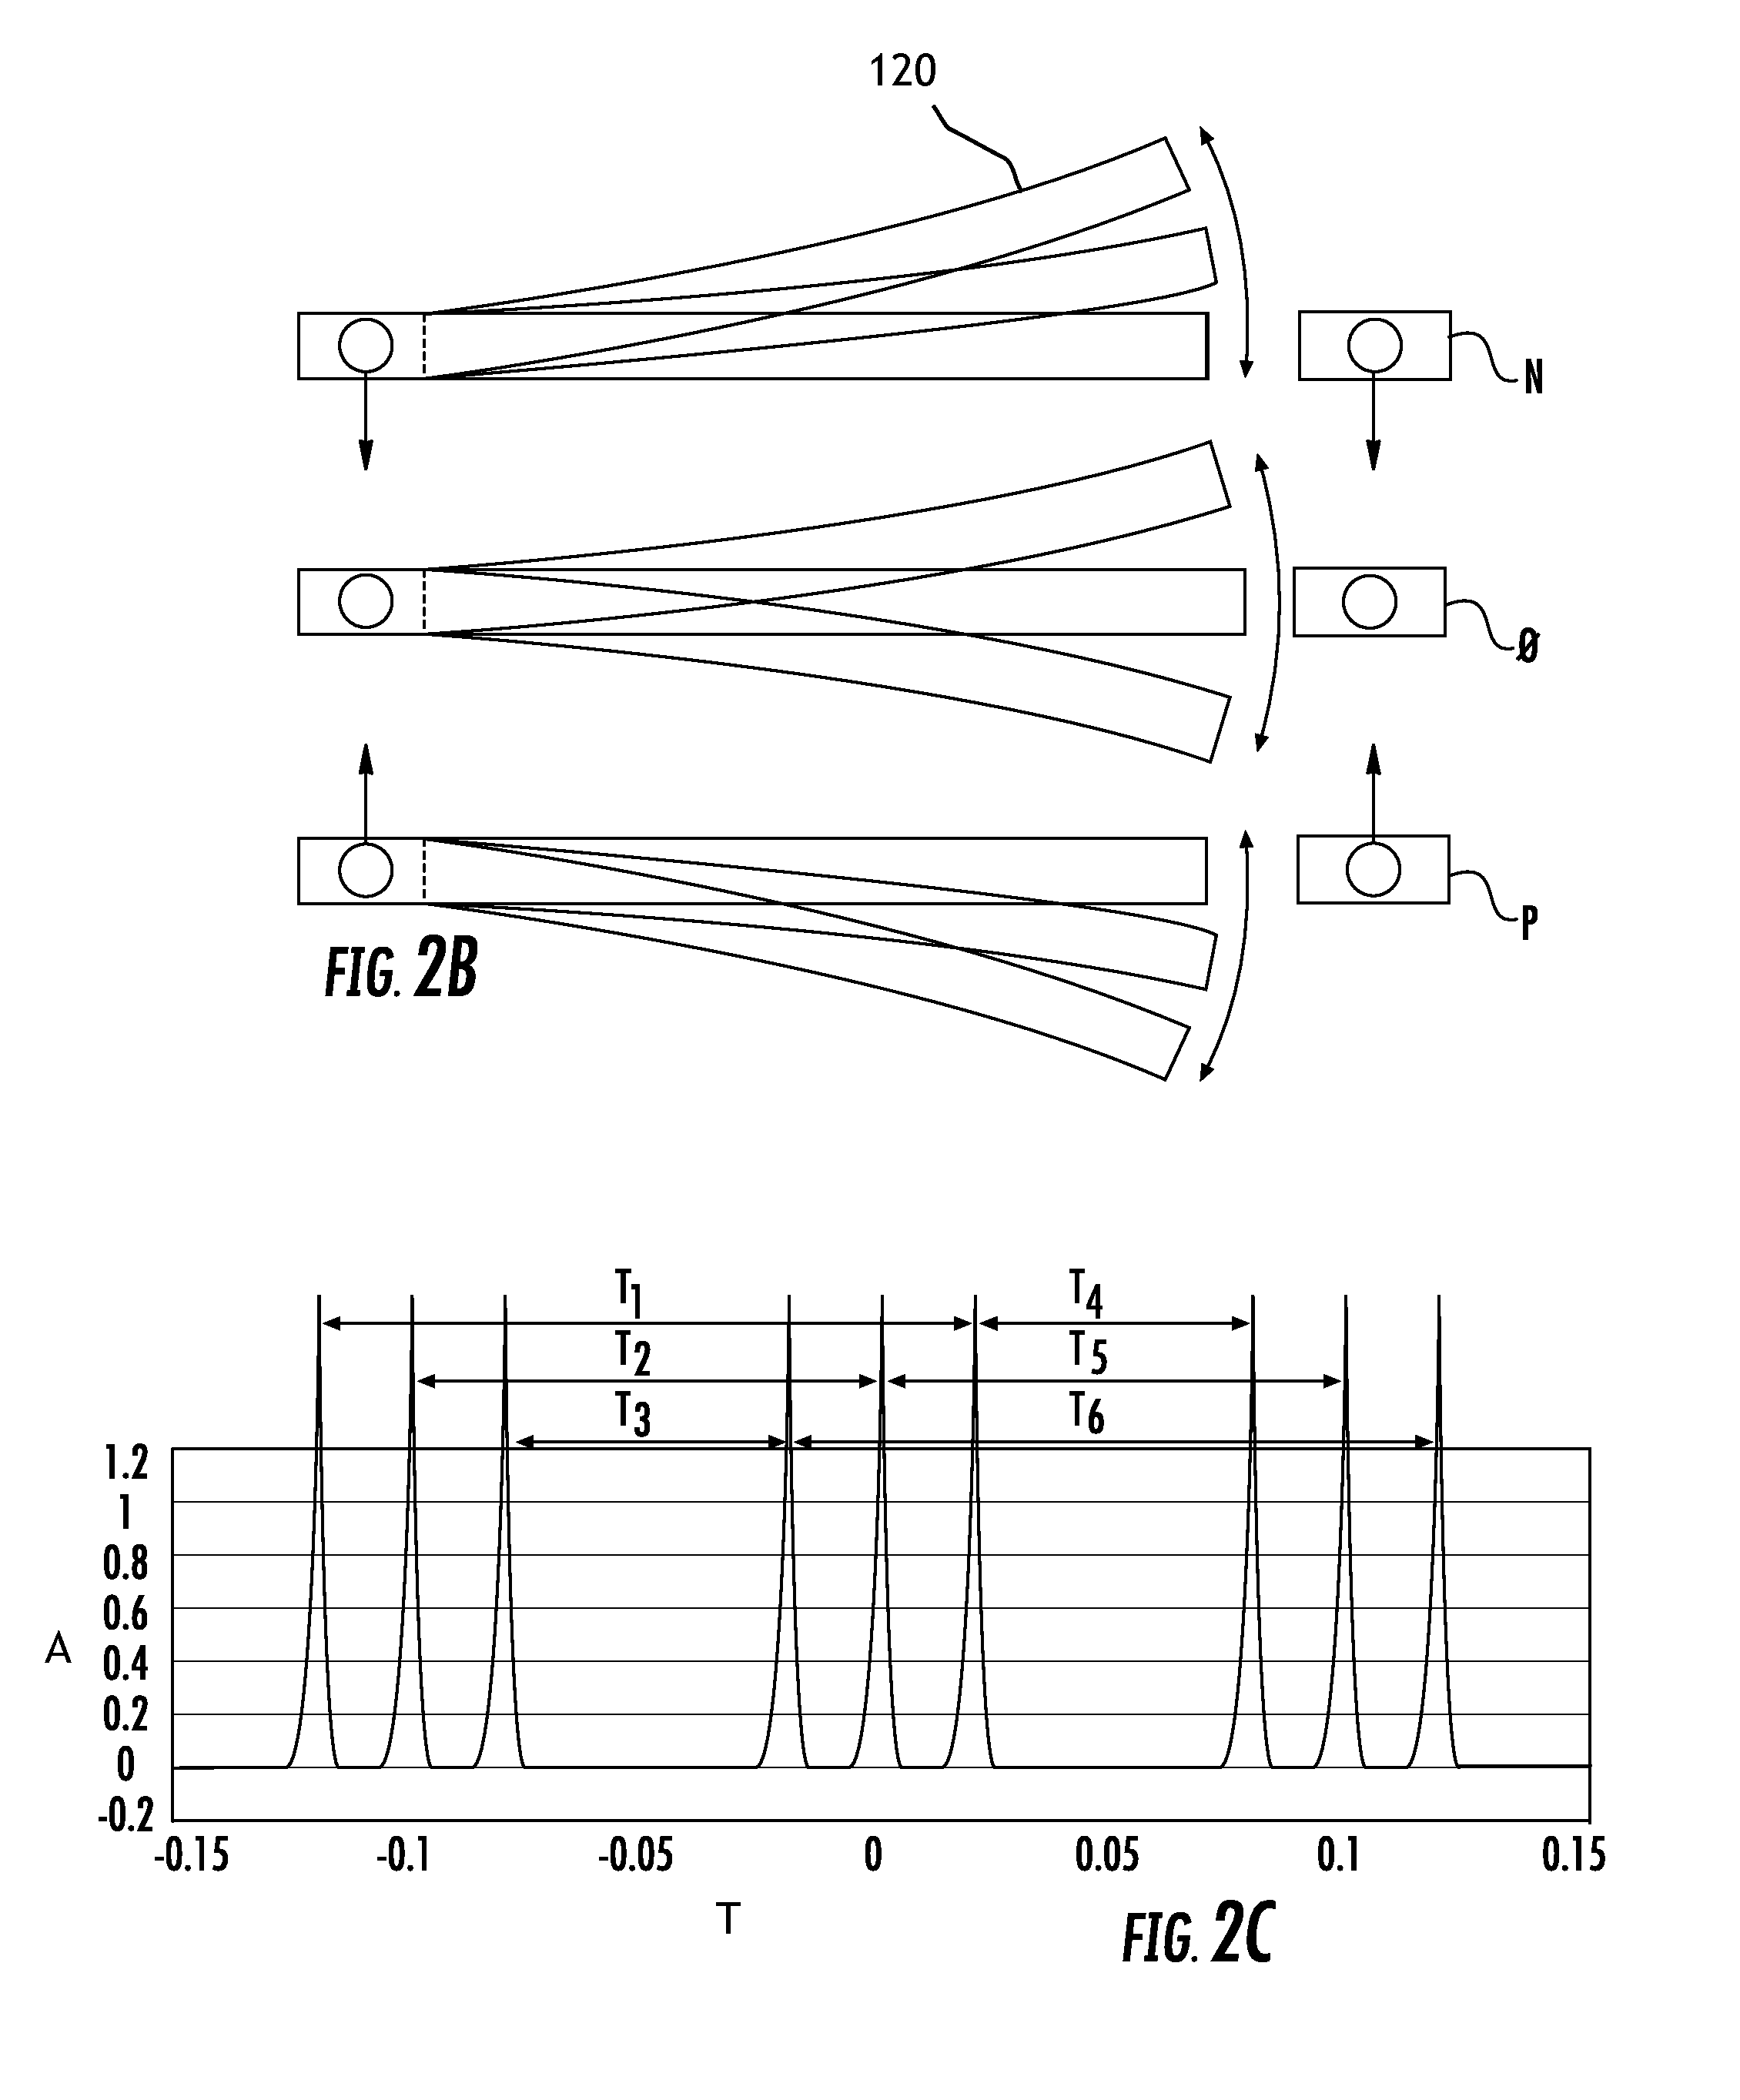 Time Domain Sensor Systems, Devices, and Methods Using Enhanced Nonlinear Least-Squares Curve Fitting